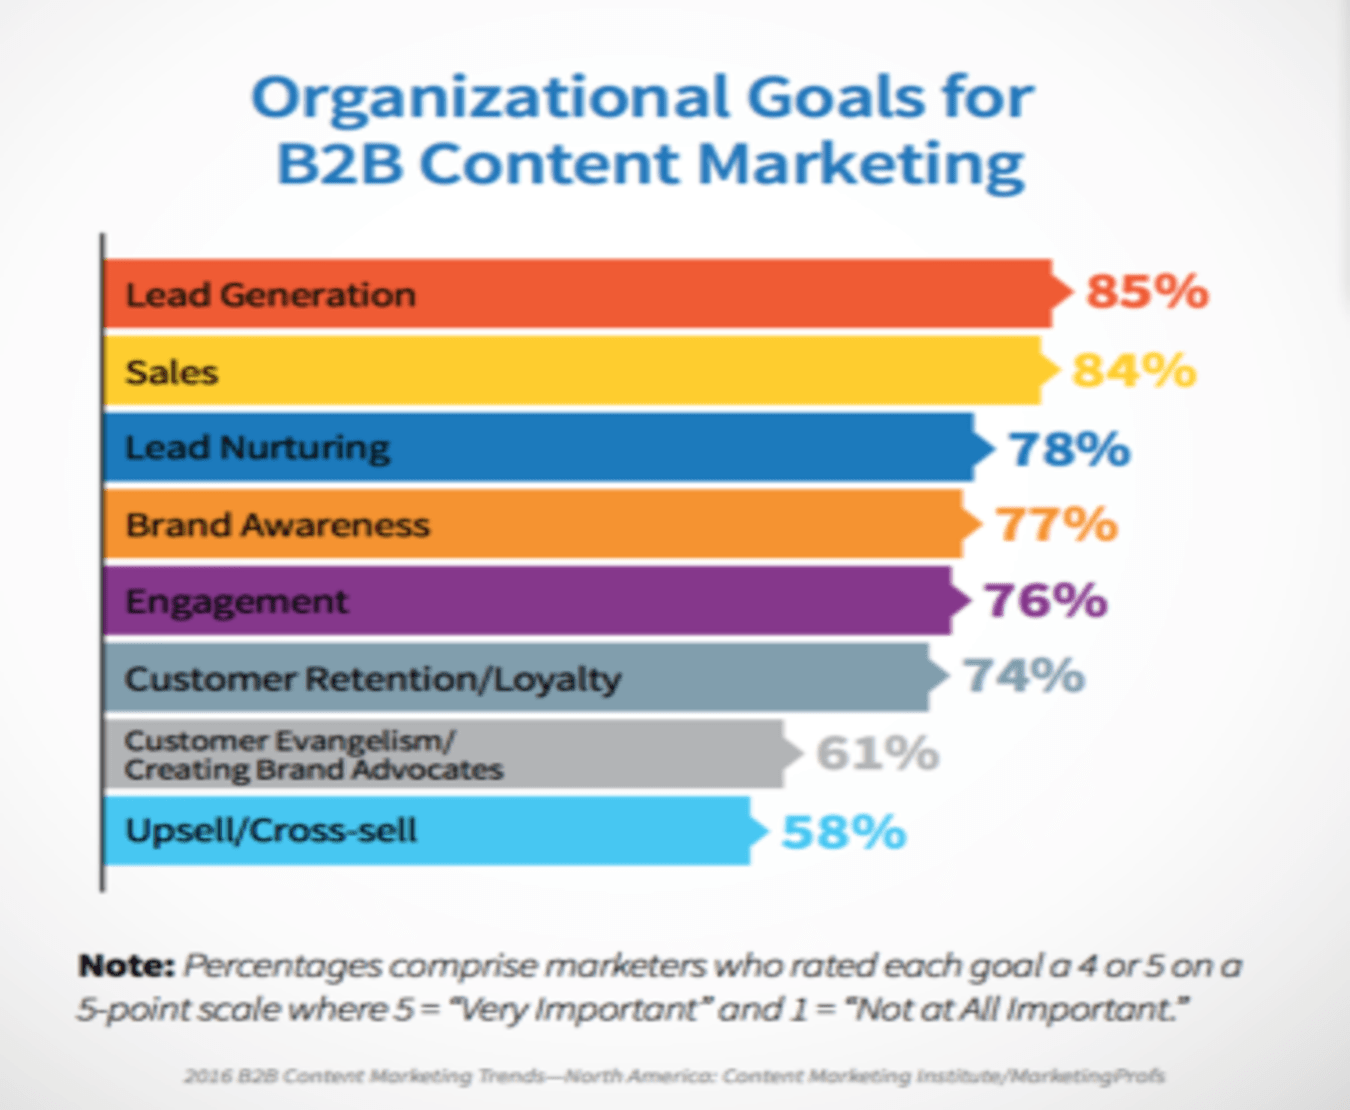 shows the top reasons that B2B marketers use content: (highest to lowest) Lead Generation, Sales, Lead Nurturing, Brand Awareness, Engagement, Customer Retention/Loyalty, Customer Evangelism/Brand Advocates, Upsell/Cross-sell